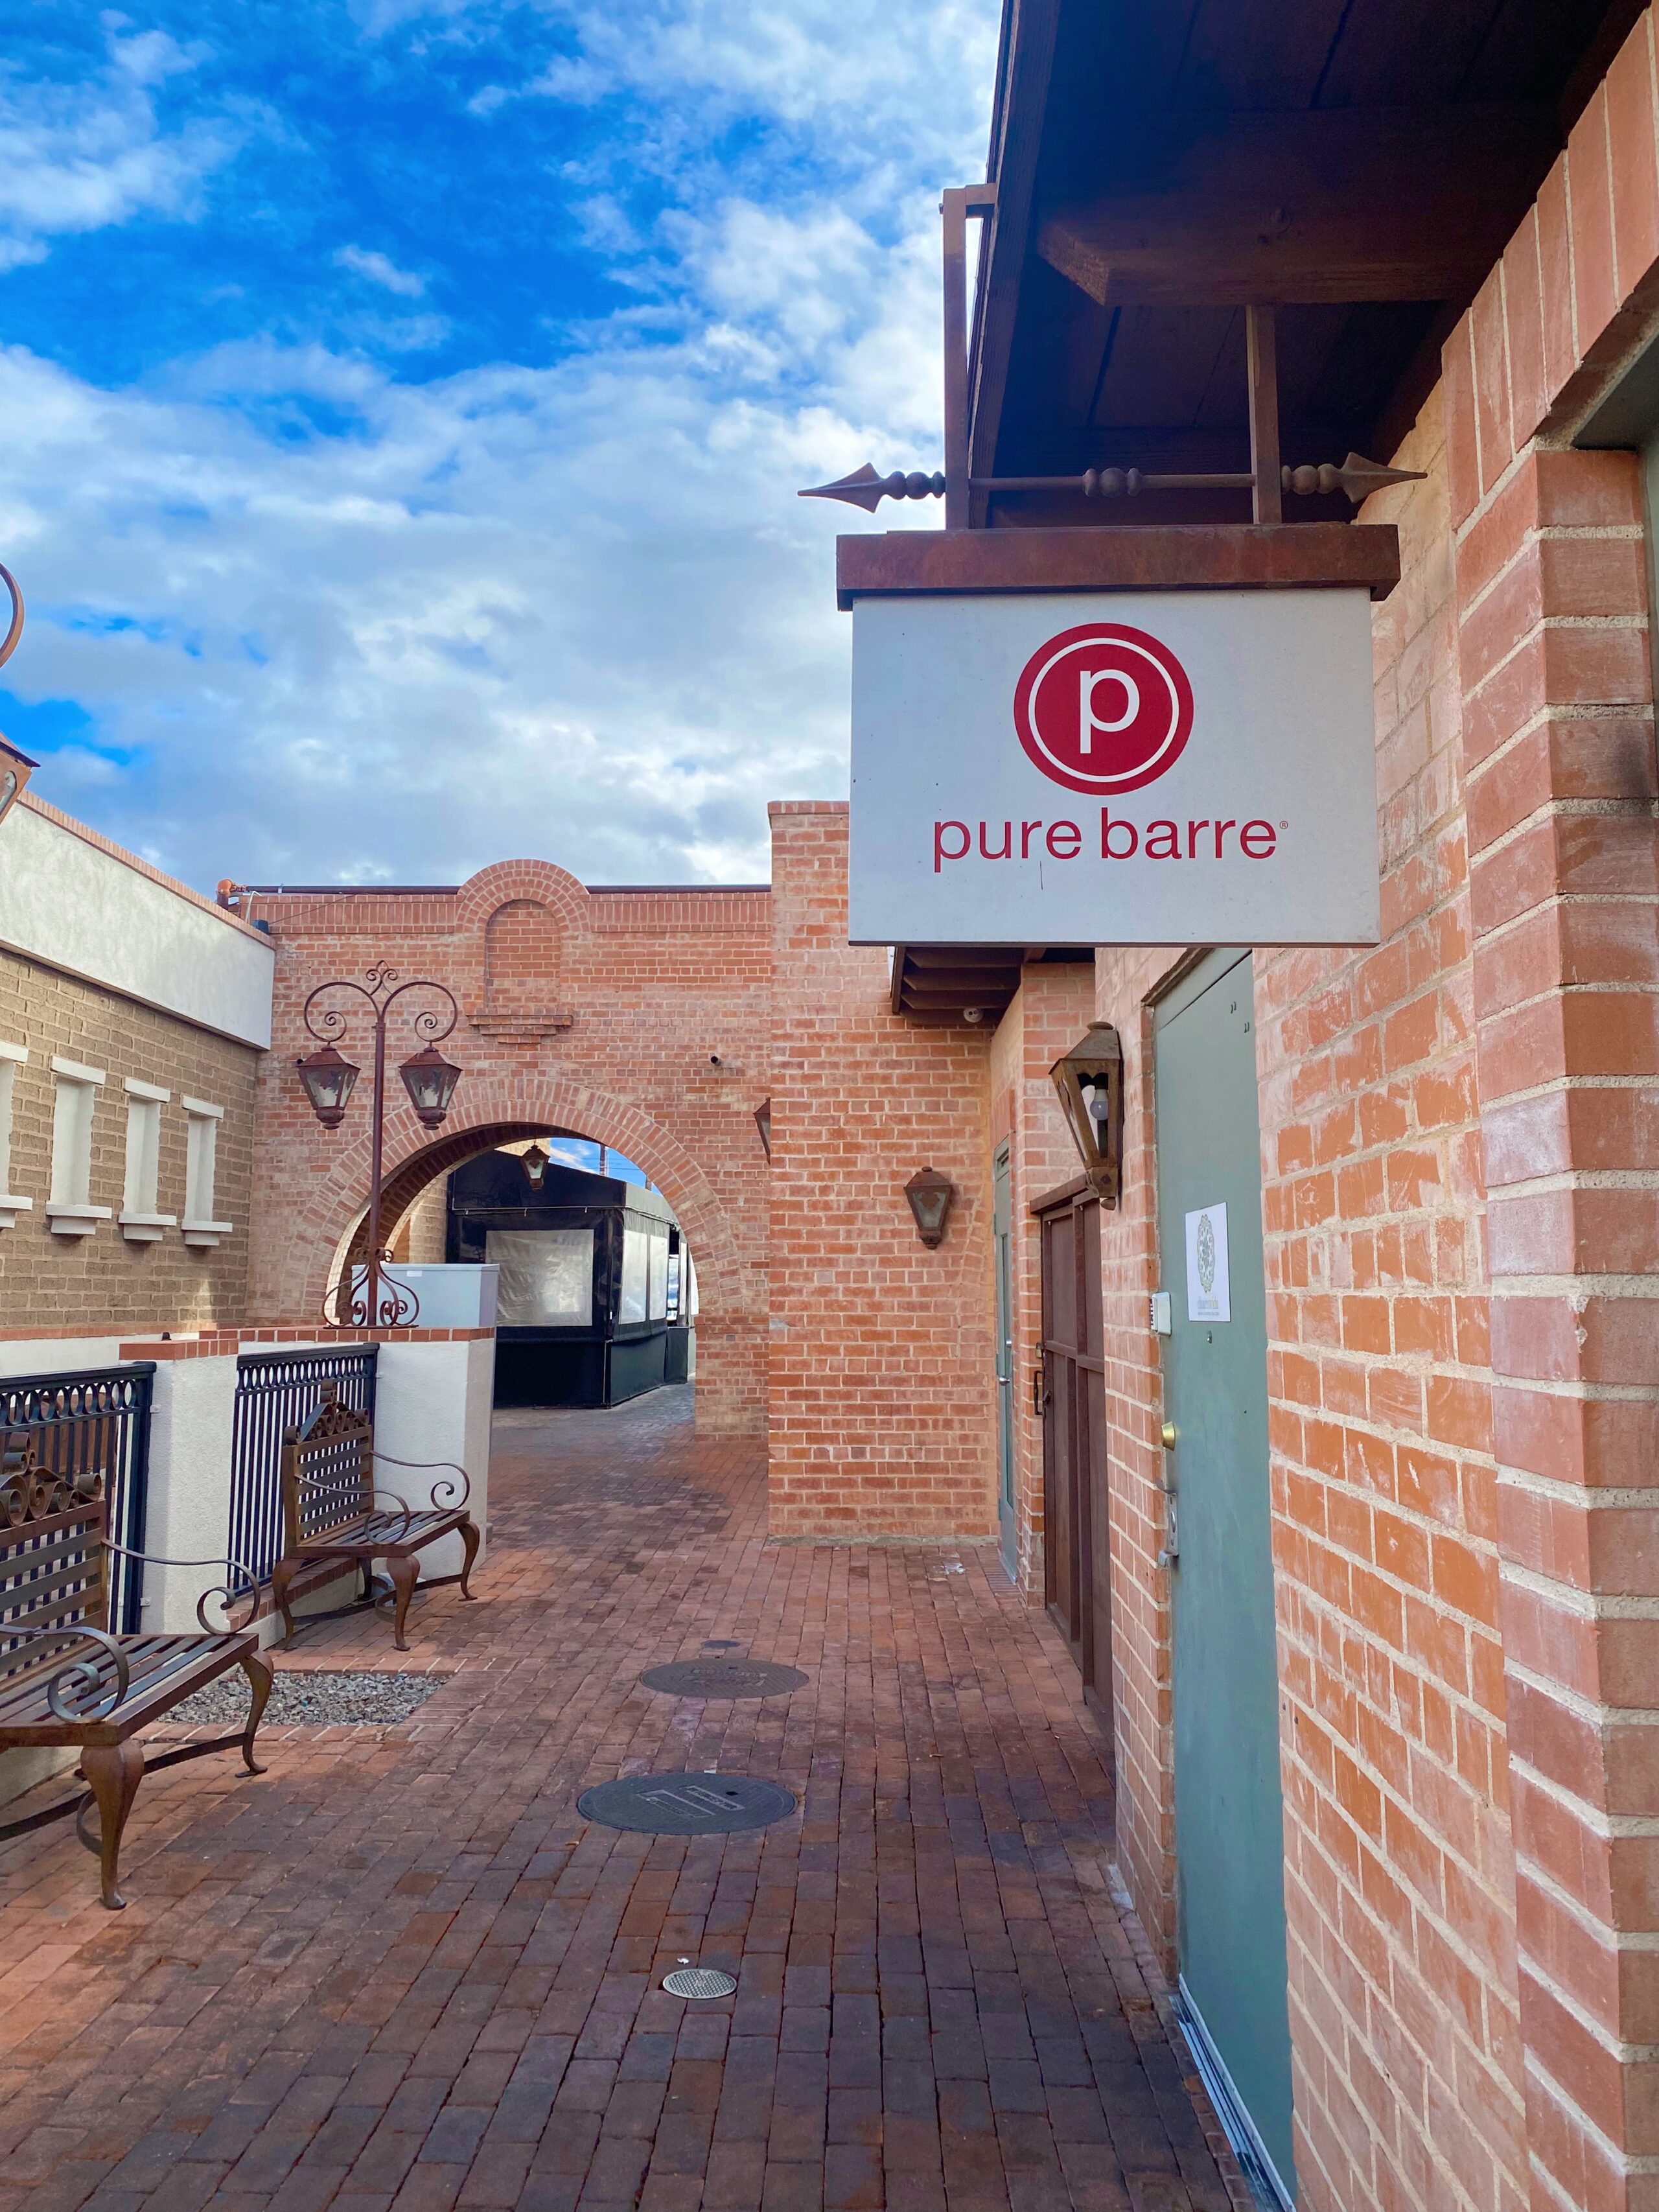 pure barre | A full day from start to finish